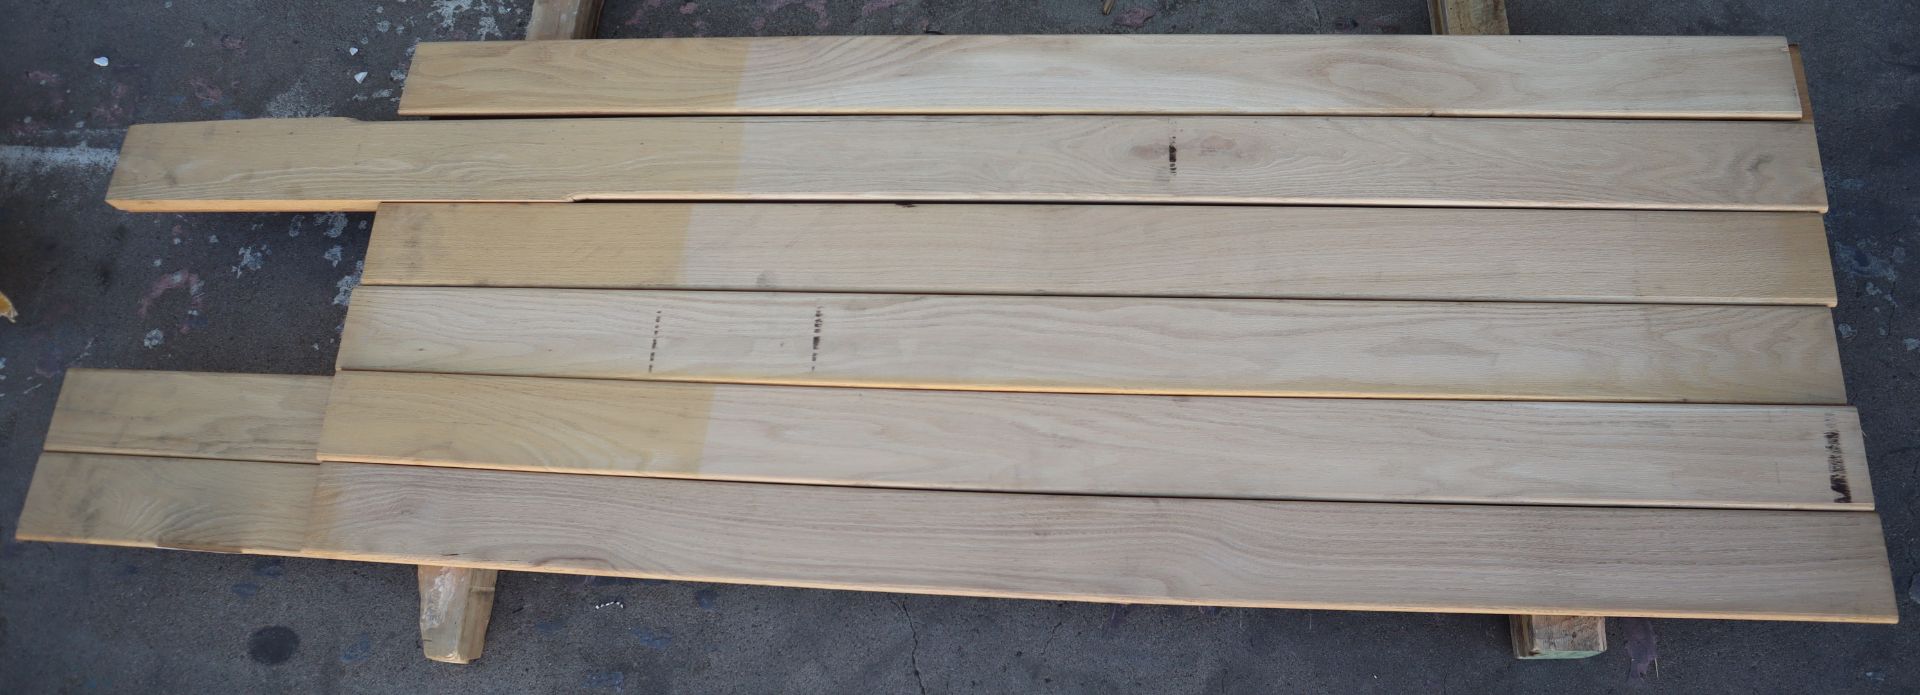 Lot of 4-1/4" Red Oak Molding 6'-7' Long - Image 3 of 4